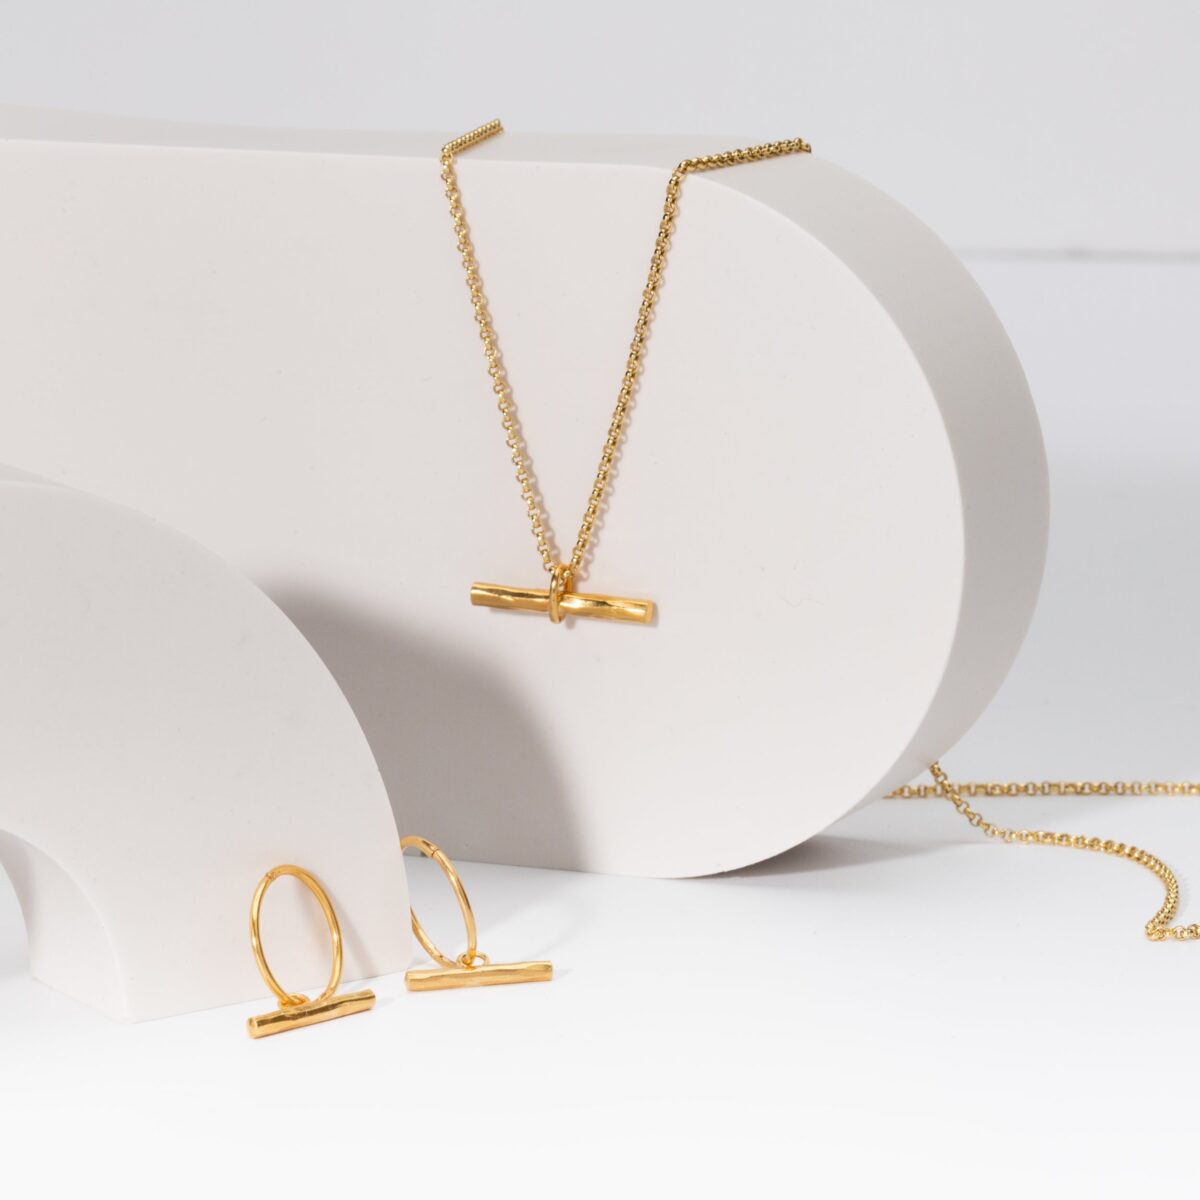 The Willow Gold Bar Necklace and Willow Gold Bar Earrings